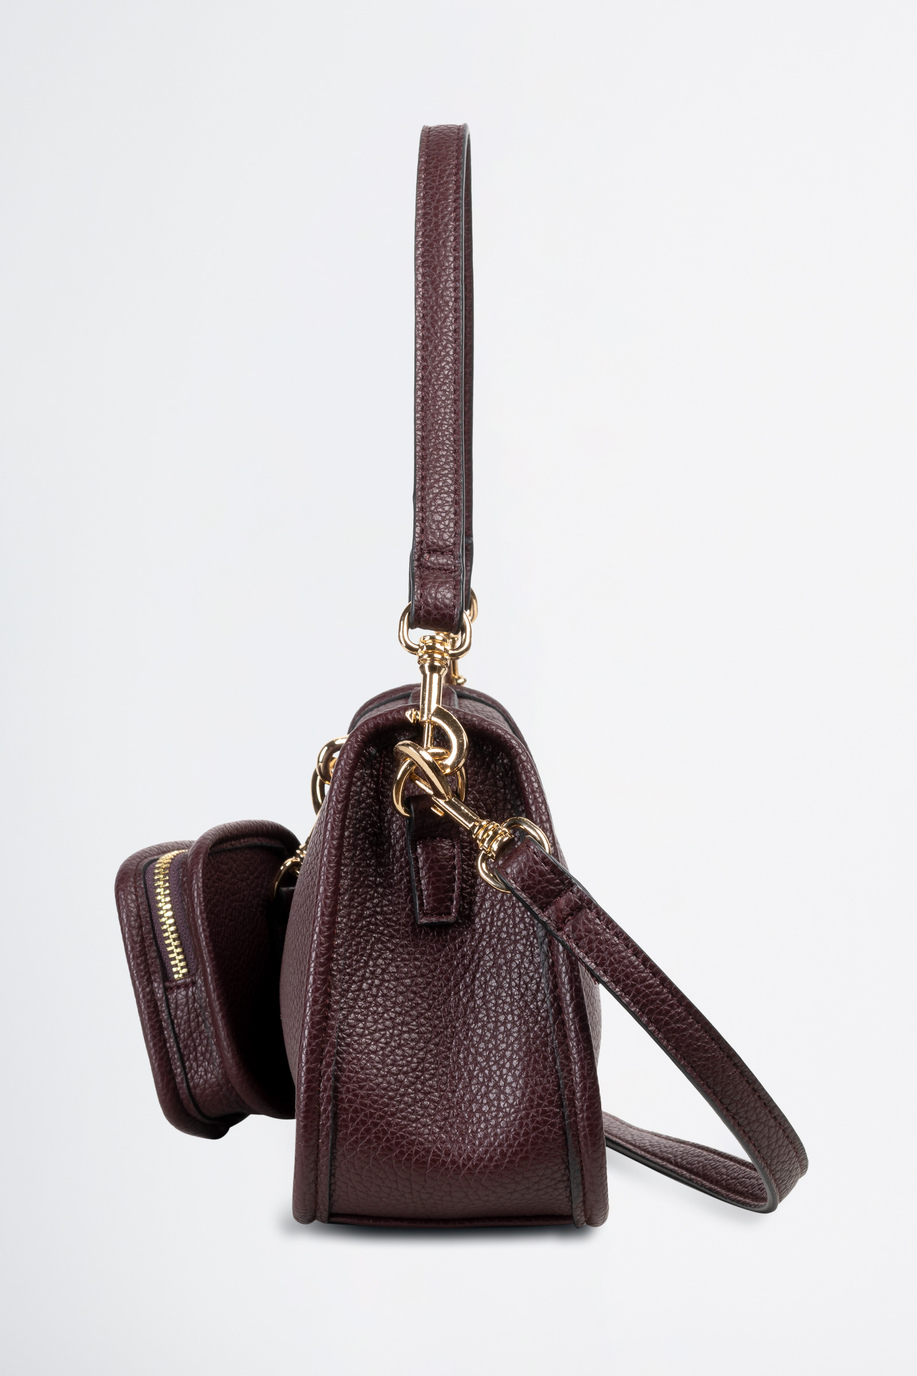 Double-shoulder bag in hammered PU fabric - Accessories for her | La Martina - Official Online Shop